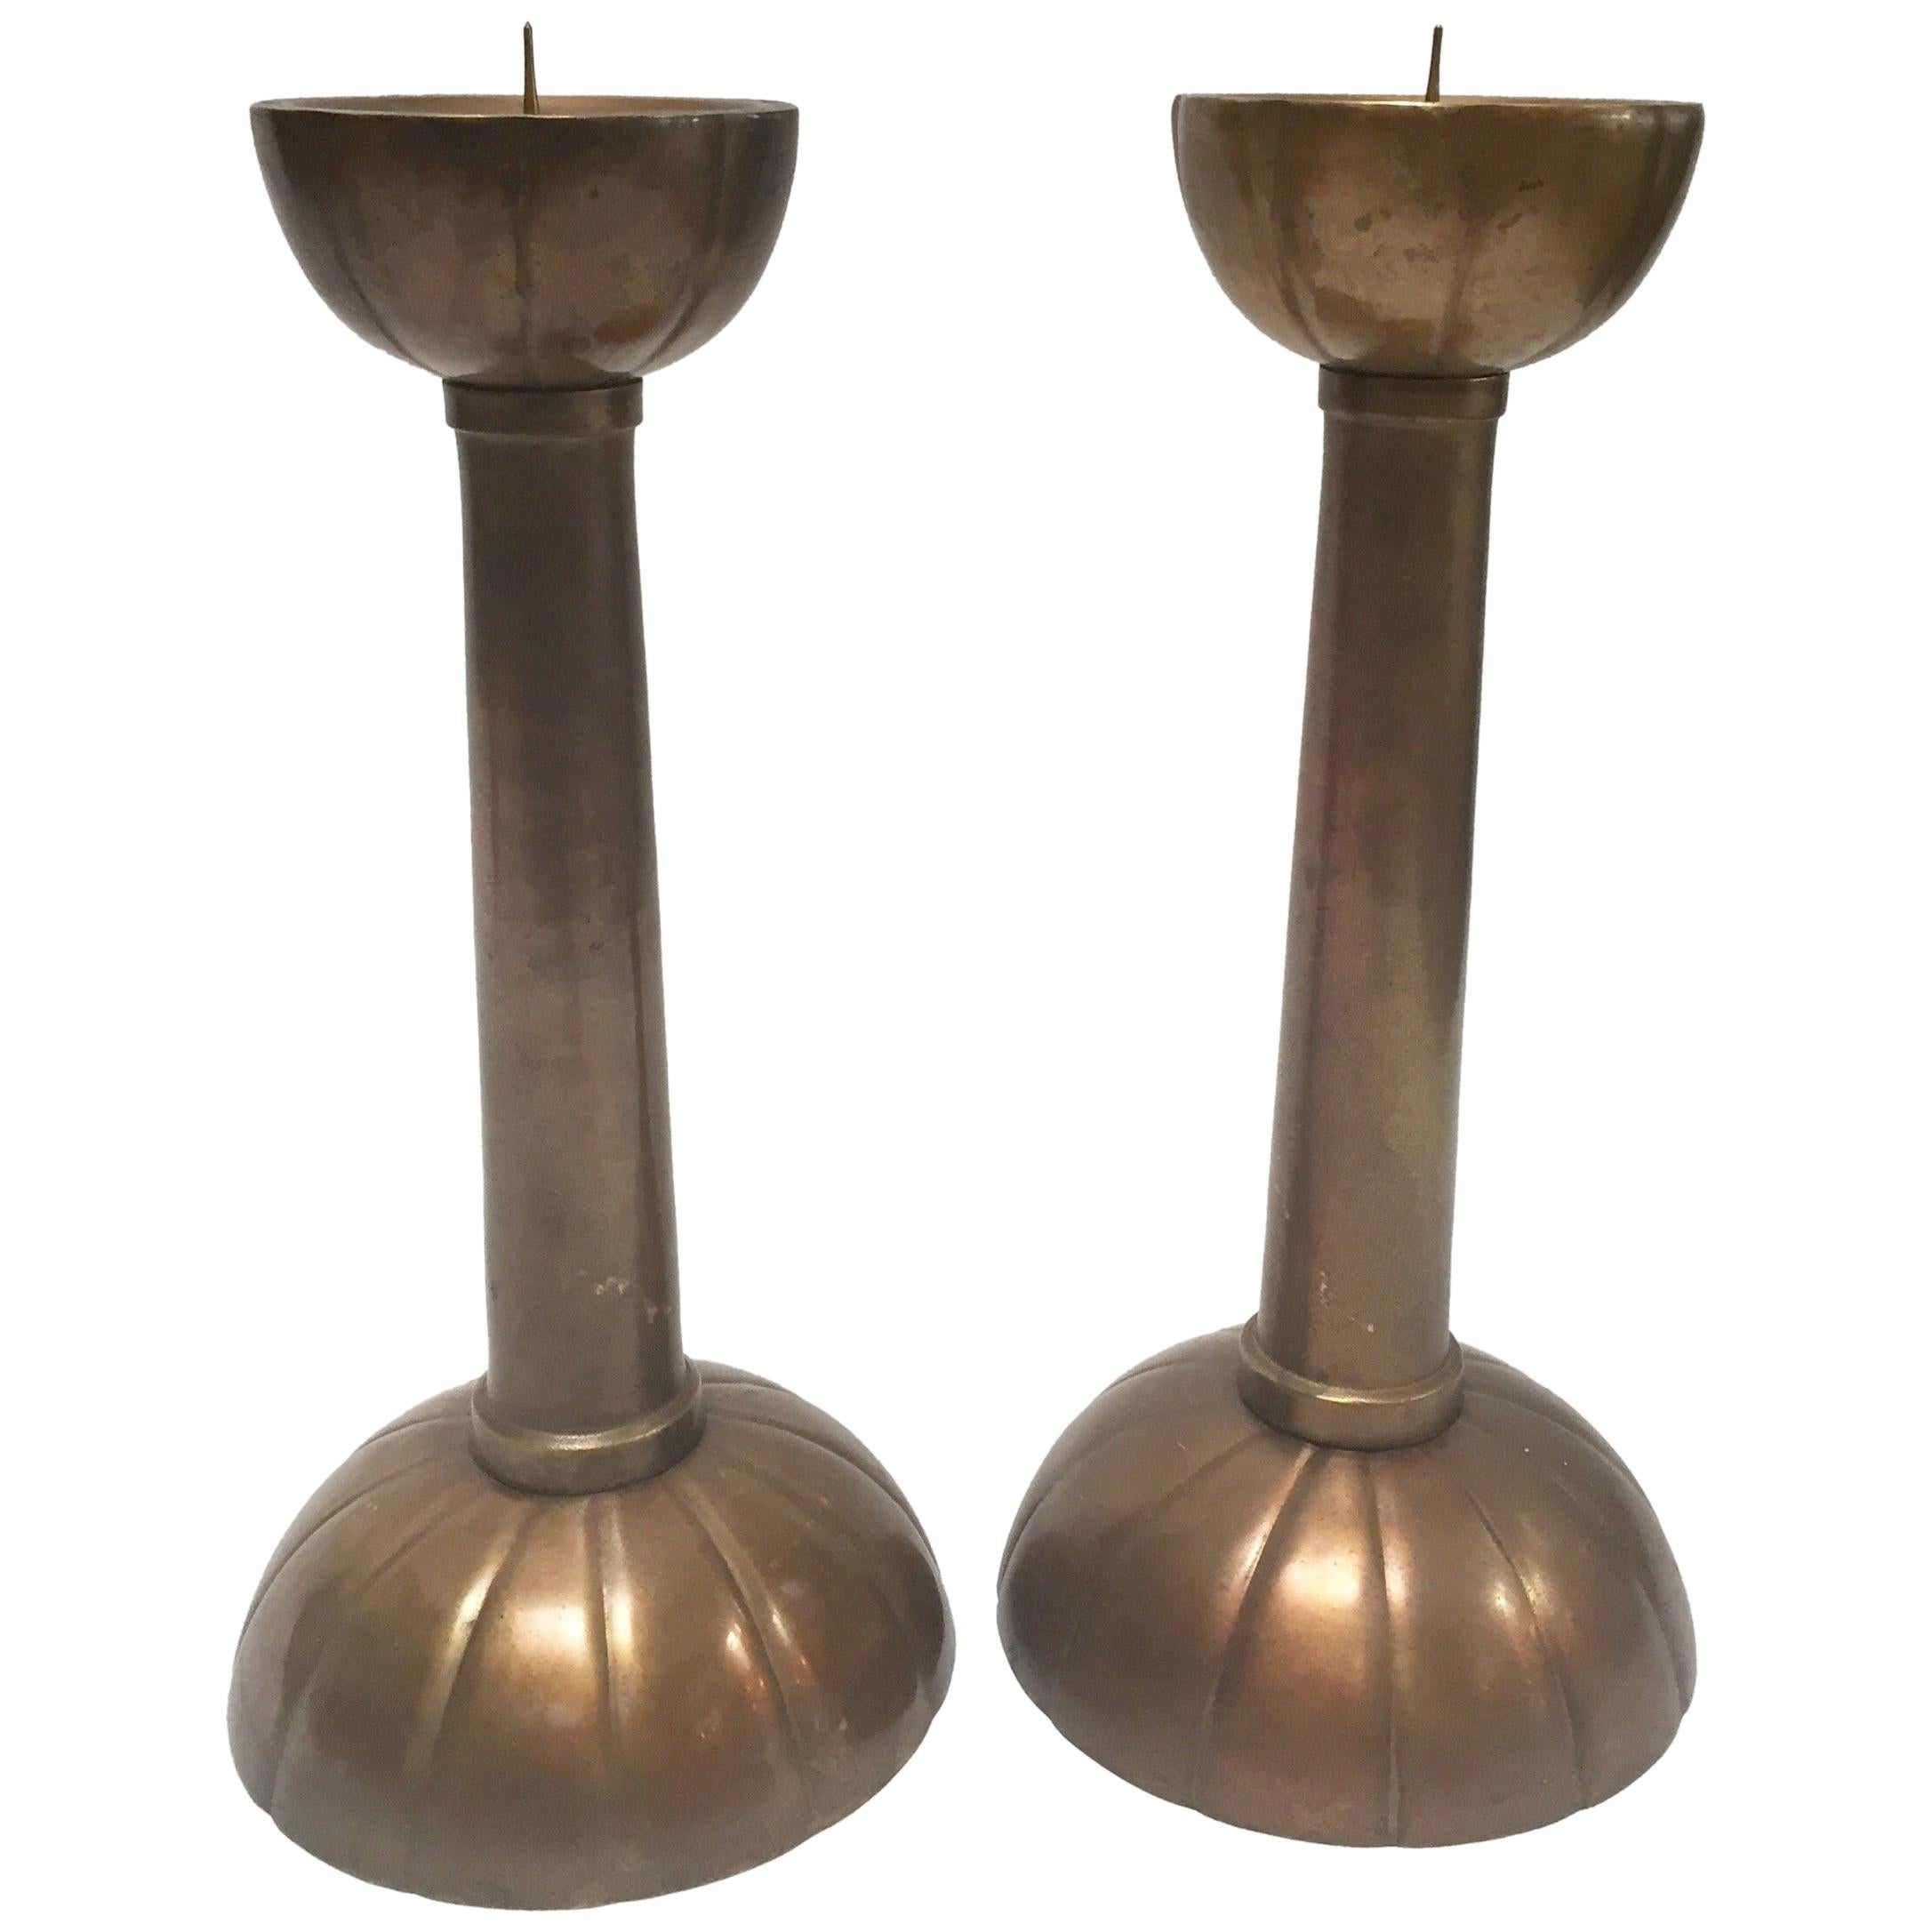 Pair of Large Brass Japanese Candlesticks on a Round Scalloped Base and Top